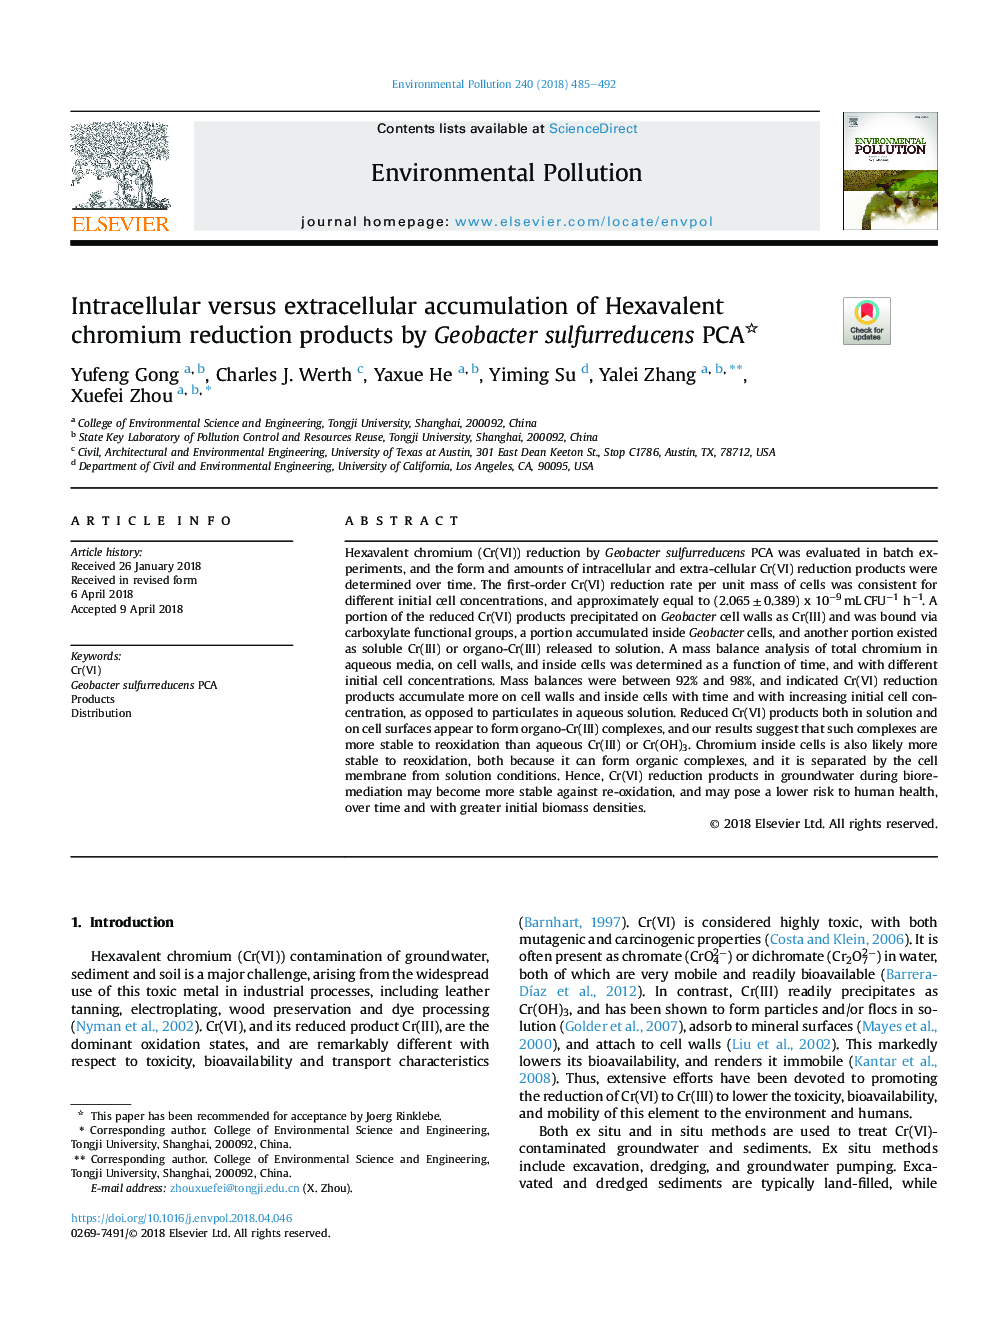 Intracellular versus extracellular accumulation of Hexavalent chromium reduction products by Geobacter sulfurreducens PCA